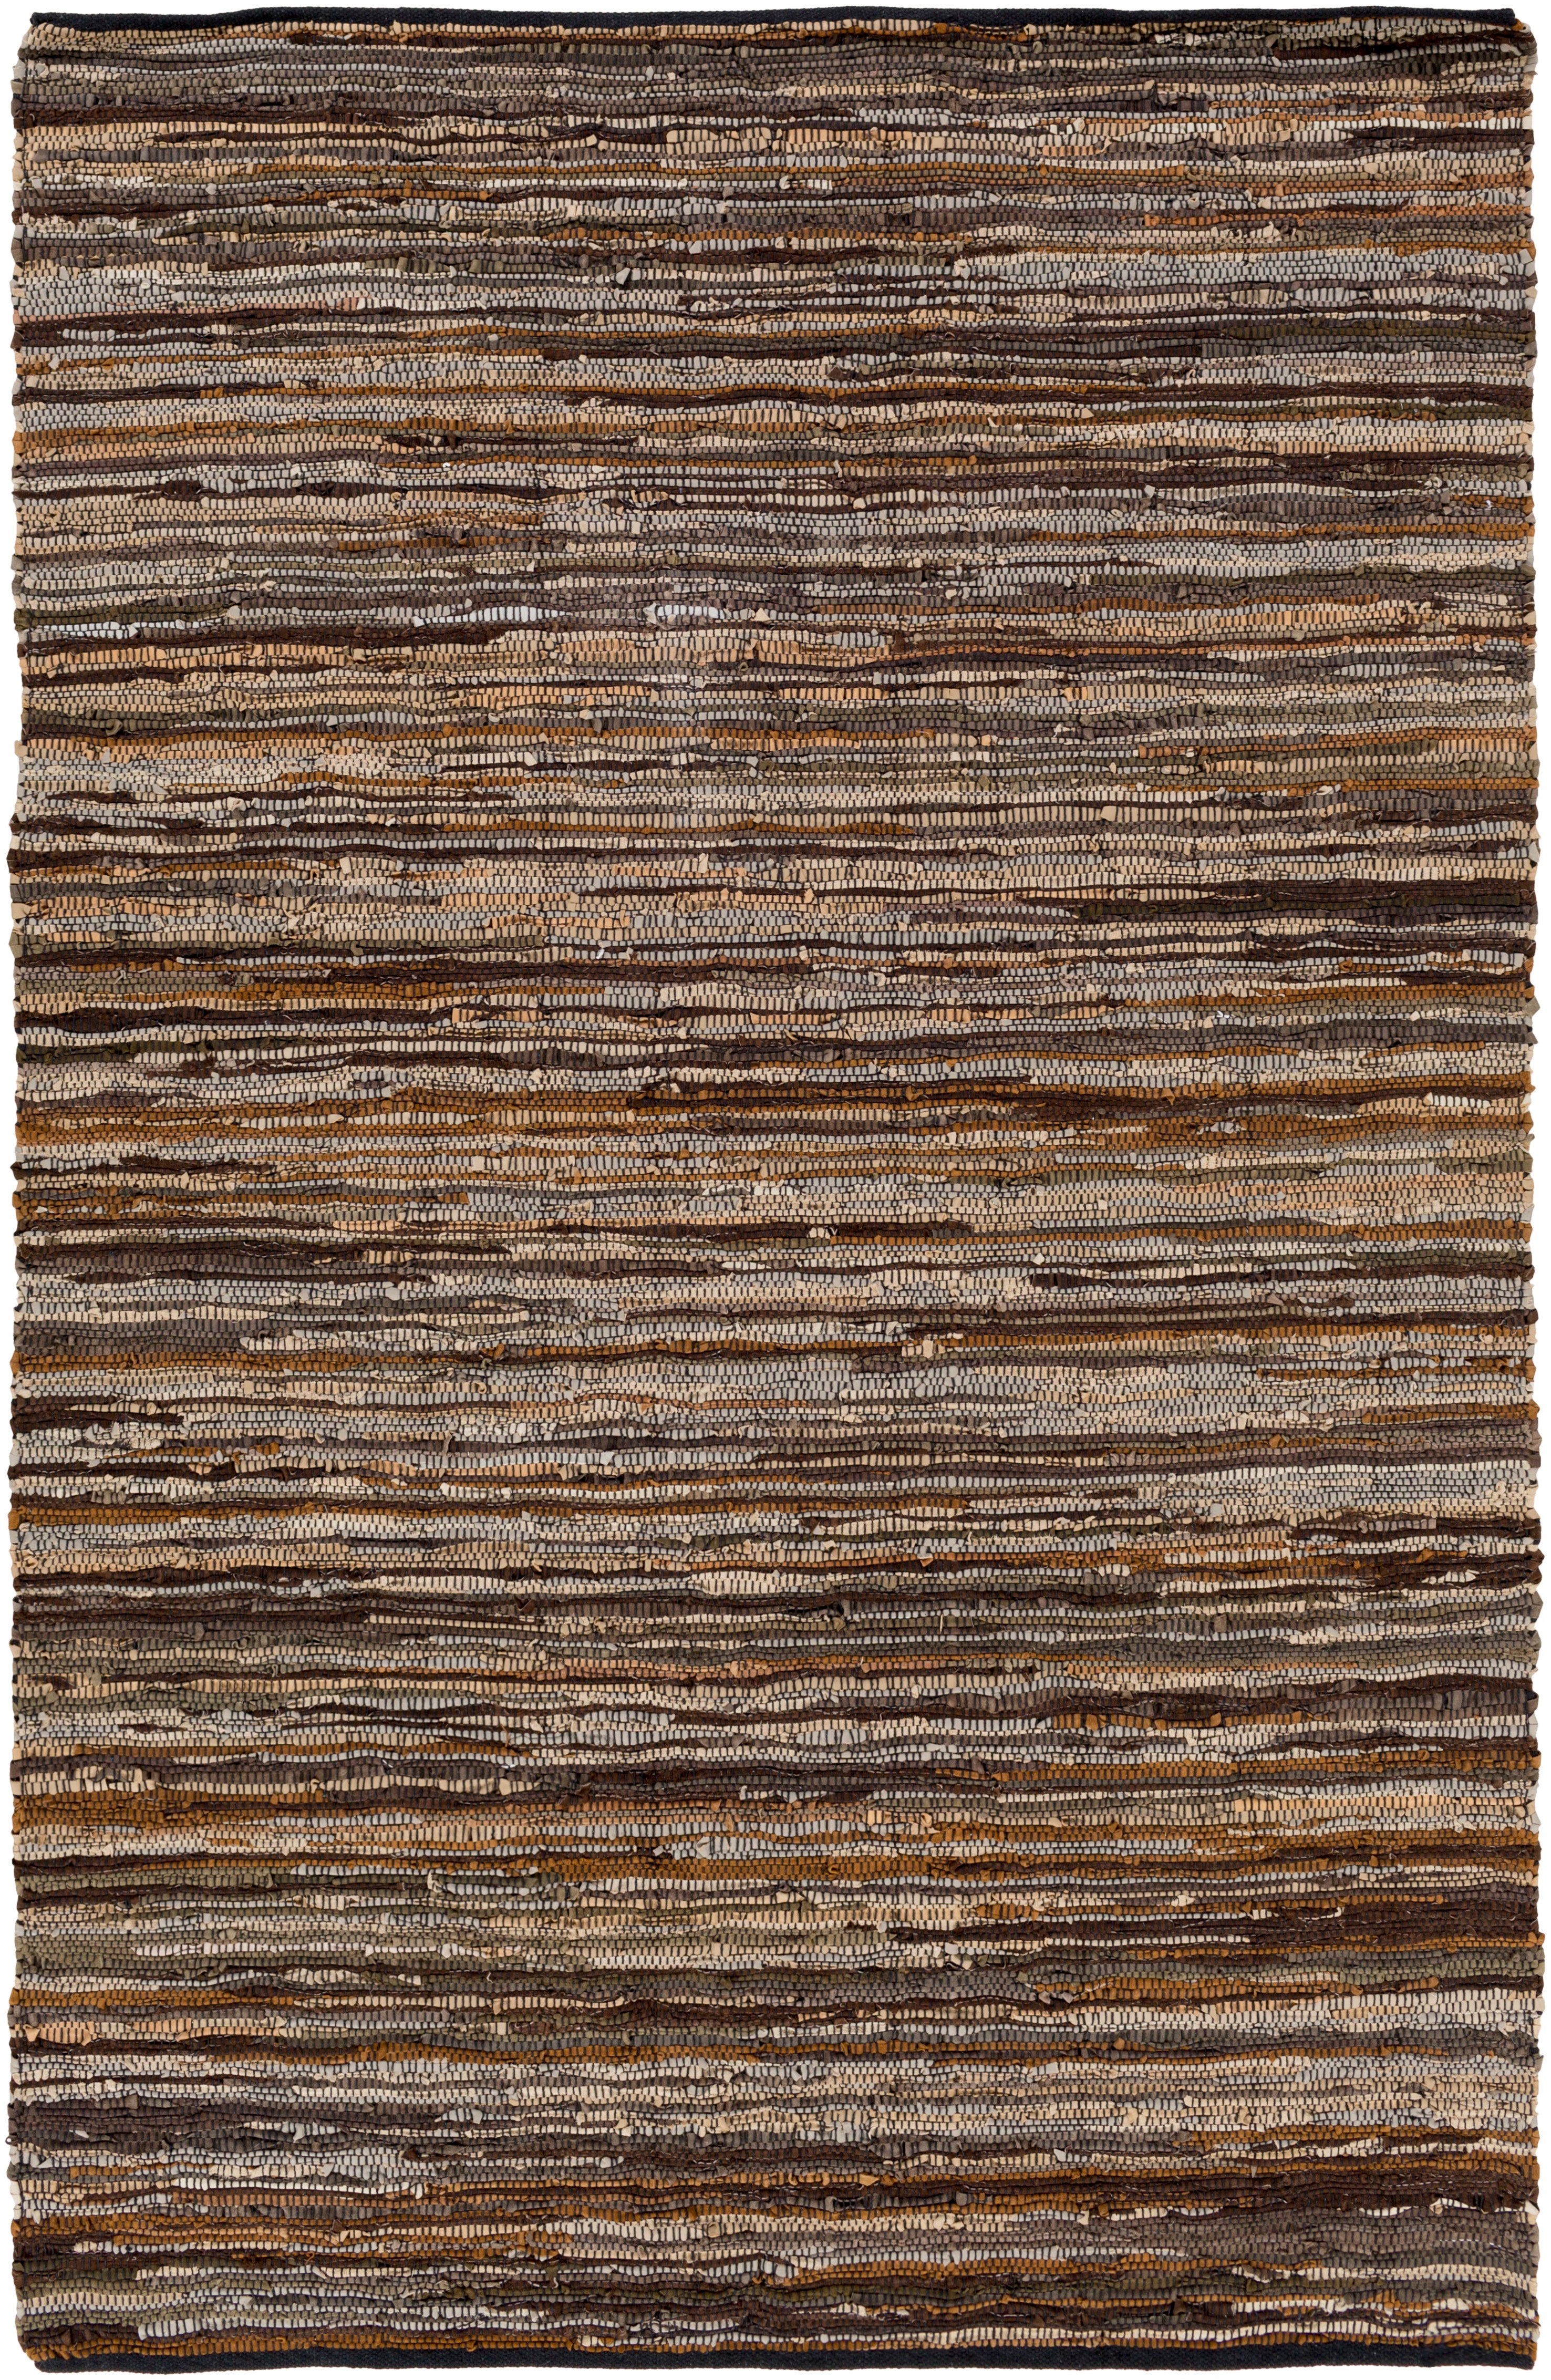 Livabliss Log Cabin LGC1000 Brown/Grey Hides and Leather Area Rug